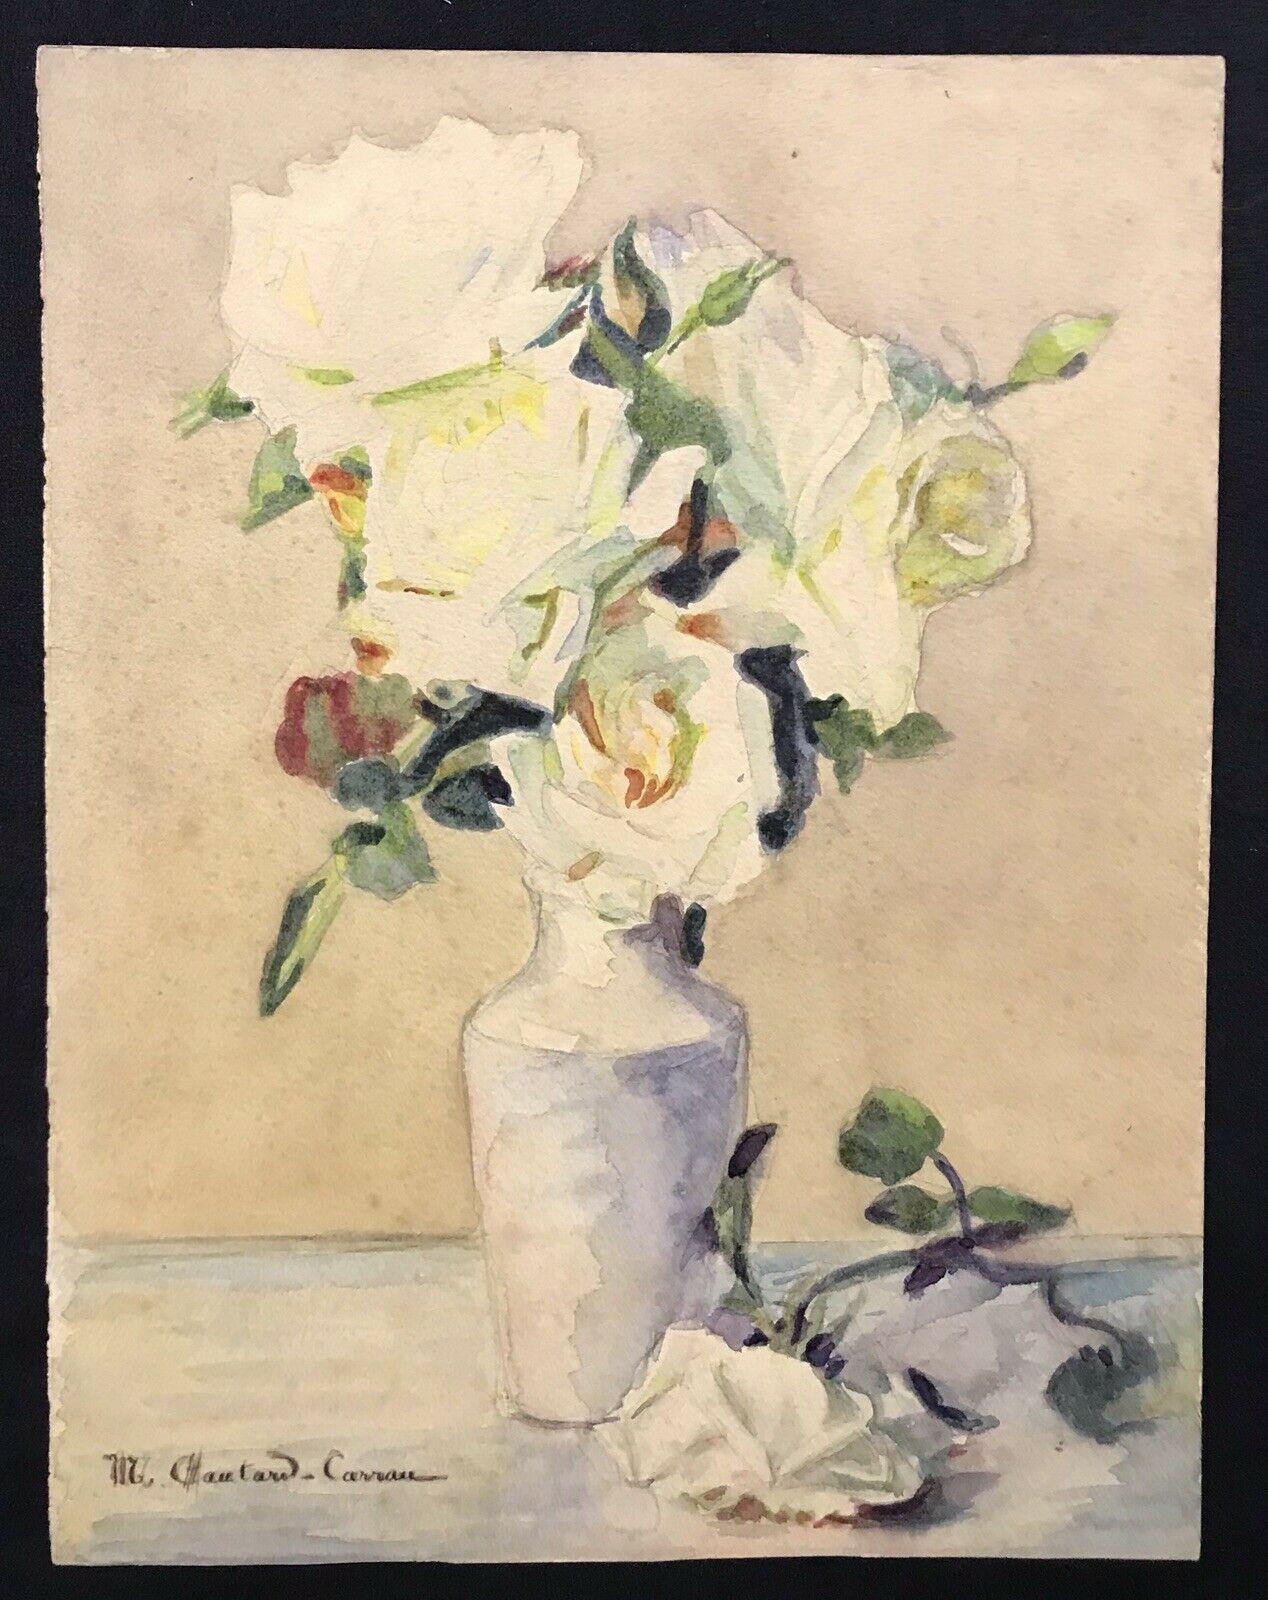 MARIE CHAUTARD-CARREAU - FINE EARLY 20thC FRENCH IMPRESSIONIST- ROSES IN VASE - Beige Abstract Painting by Marie-Amelie Chautard-Carreau